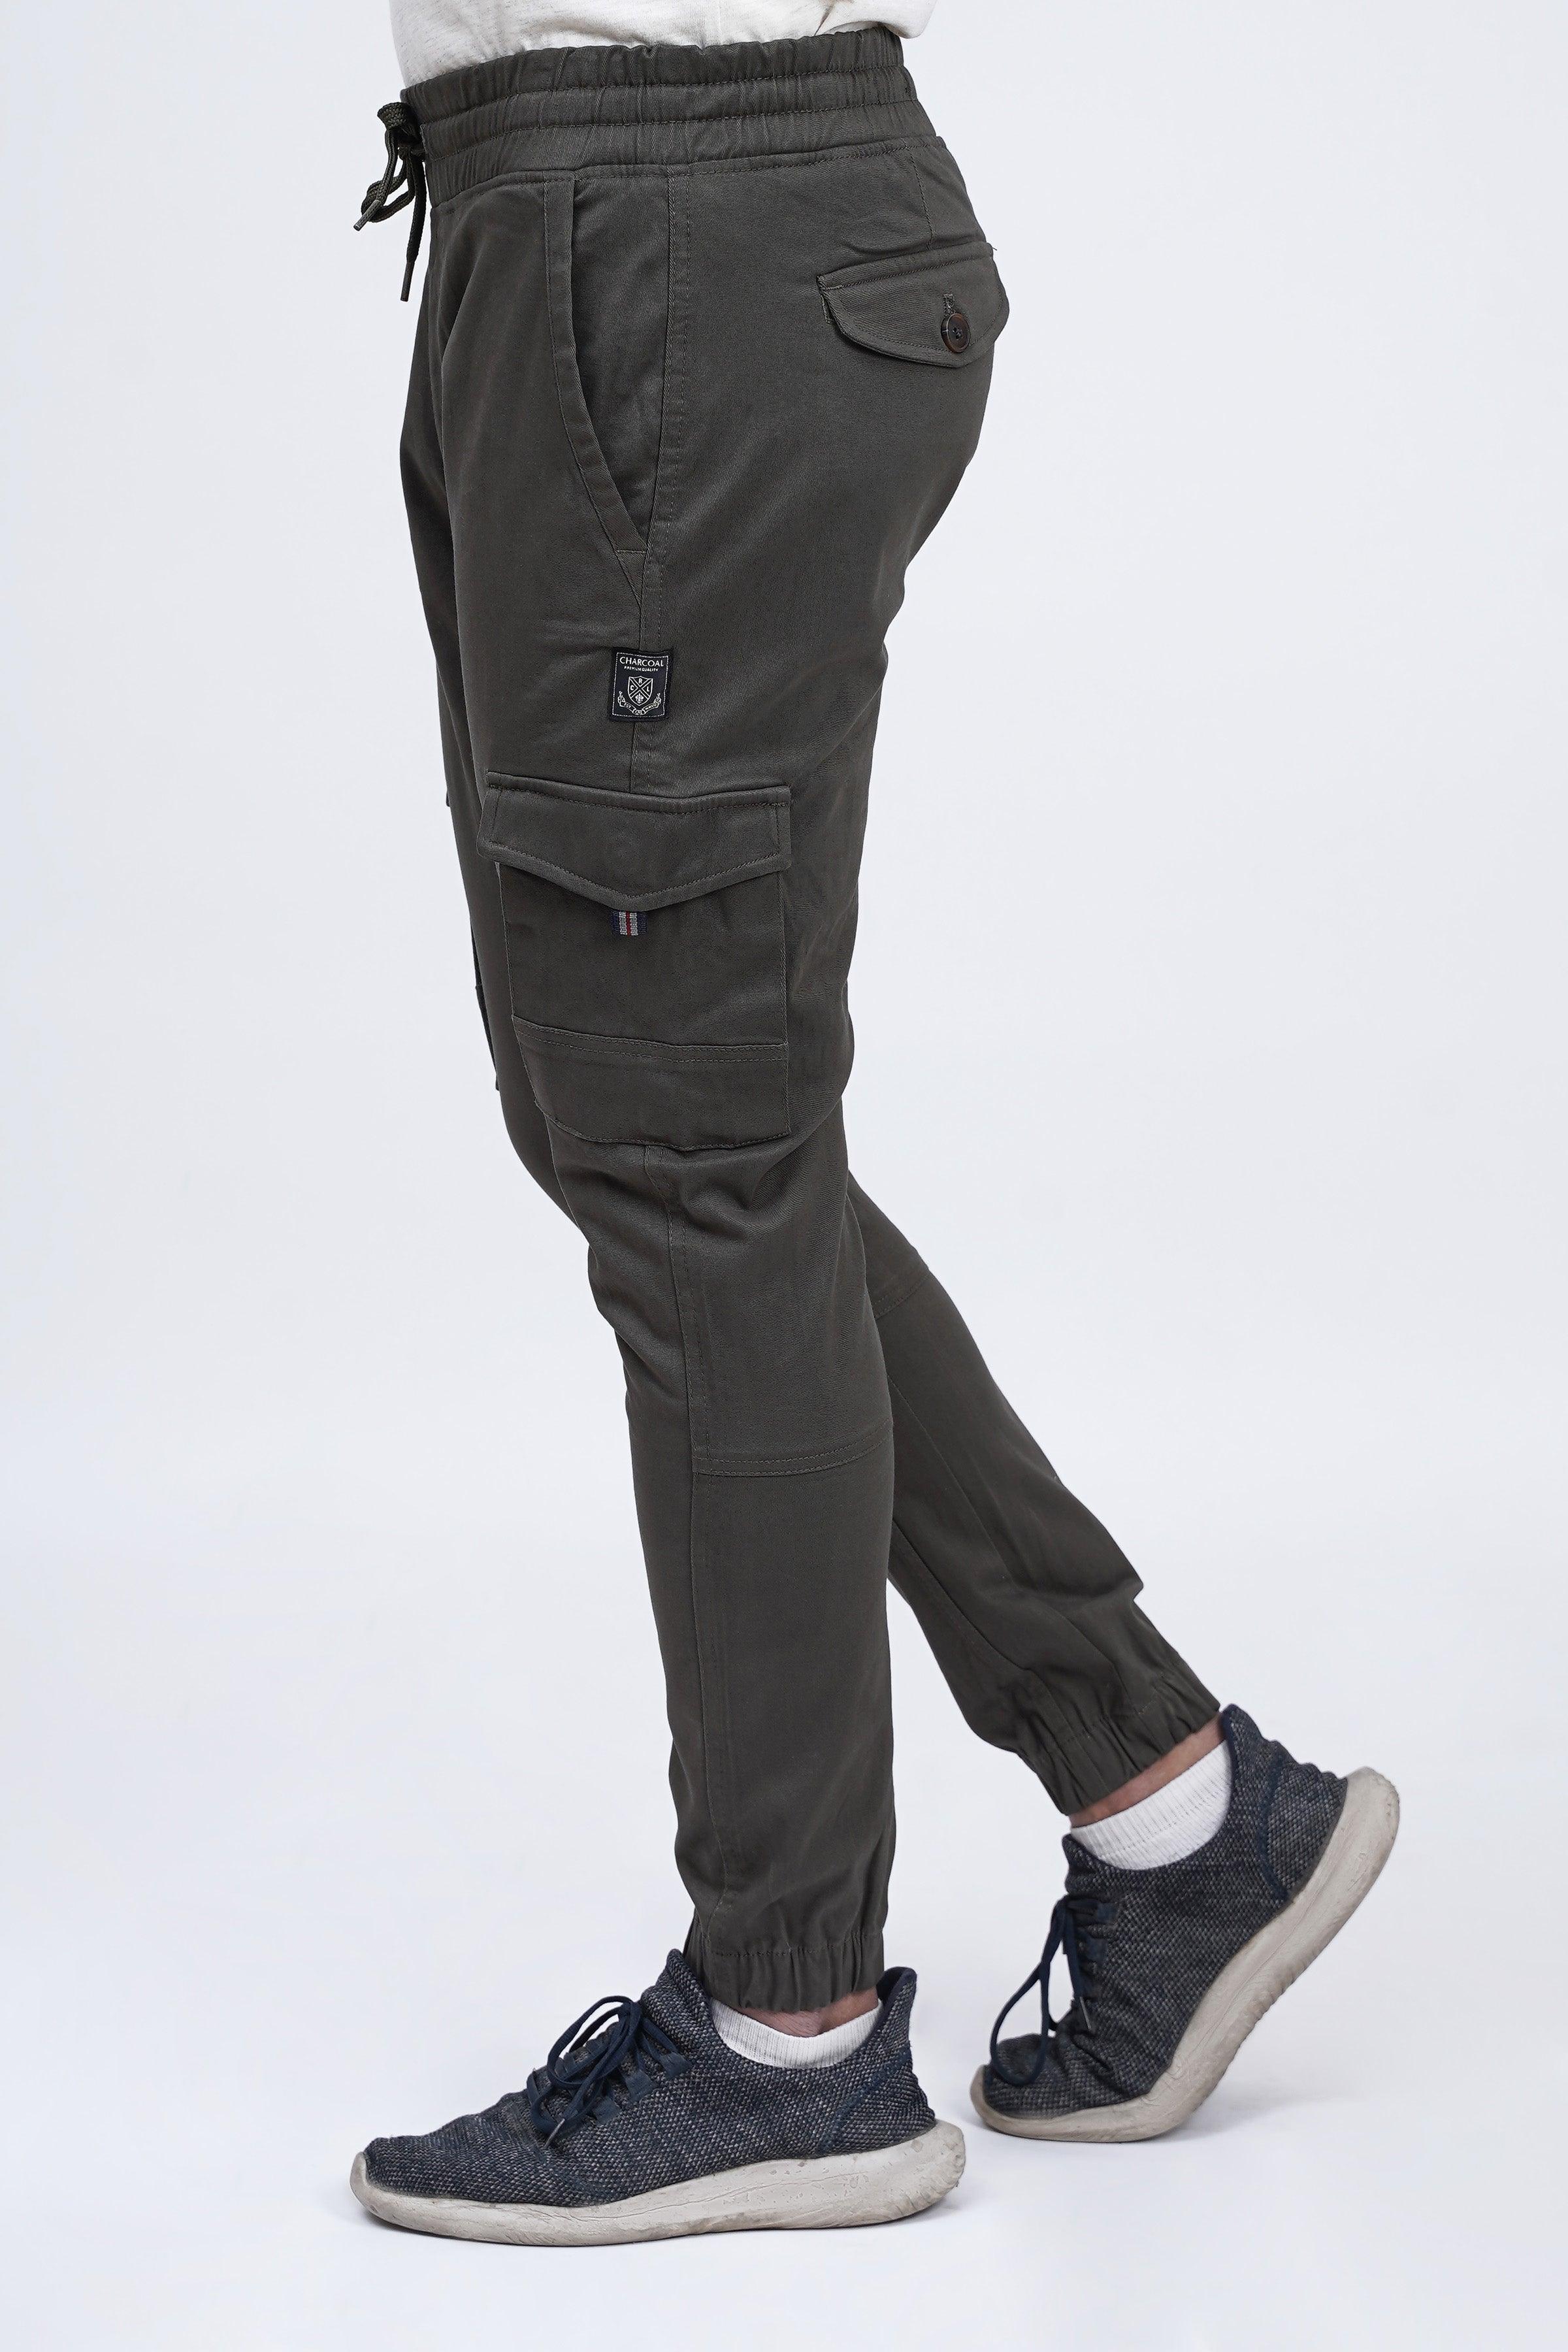 CARGO JOGGER TROUSER DARK OLIVE at Charcoal Clothing